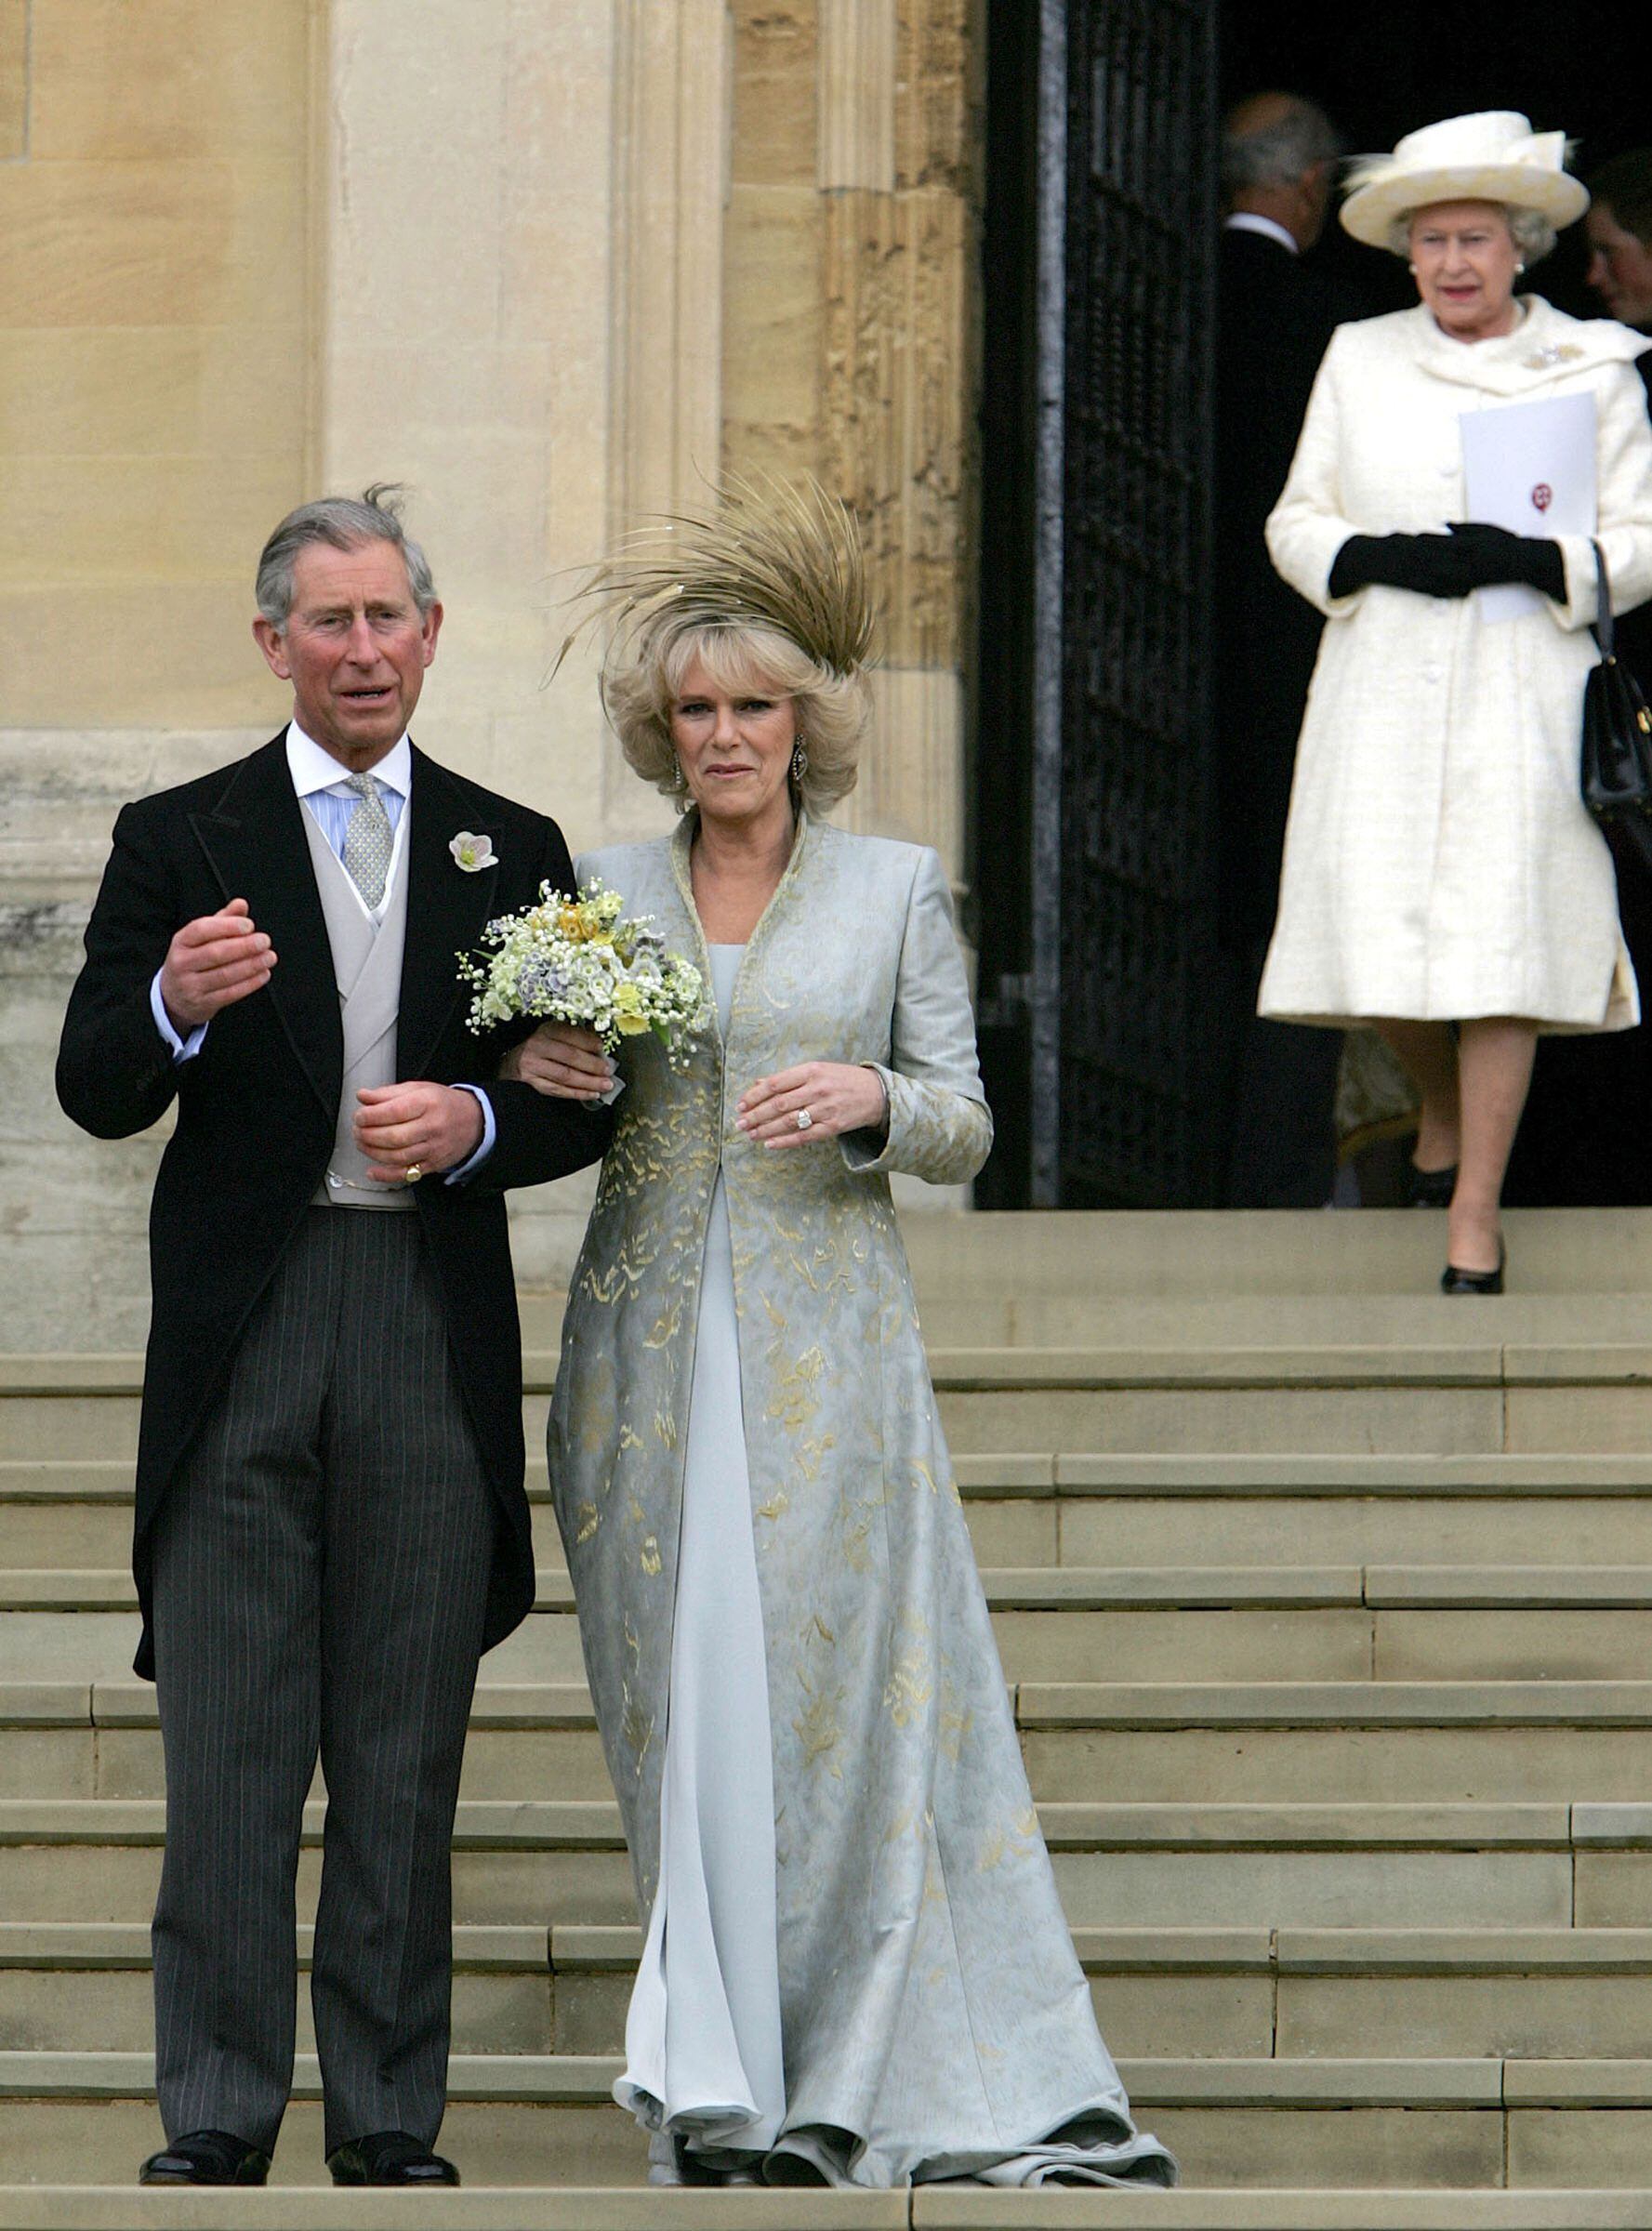 Stock Image |  Britain's Prince Charles and his bride Camilla, Duchess of Cornwall leave St George's Chapel in Windsor after the church blessing of their civil wedding ceremony, April 09, 2005. In the background is the Queen Elizabeth of Great Britain.  (Photo by ALASTAIR GRANT / POOL / AFP)